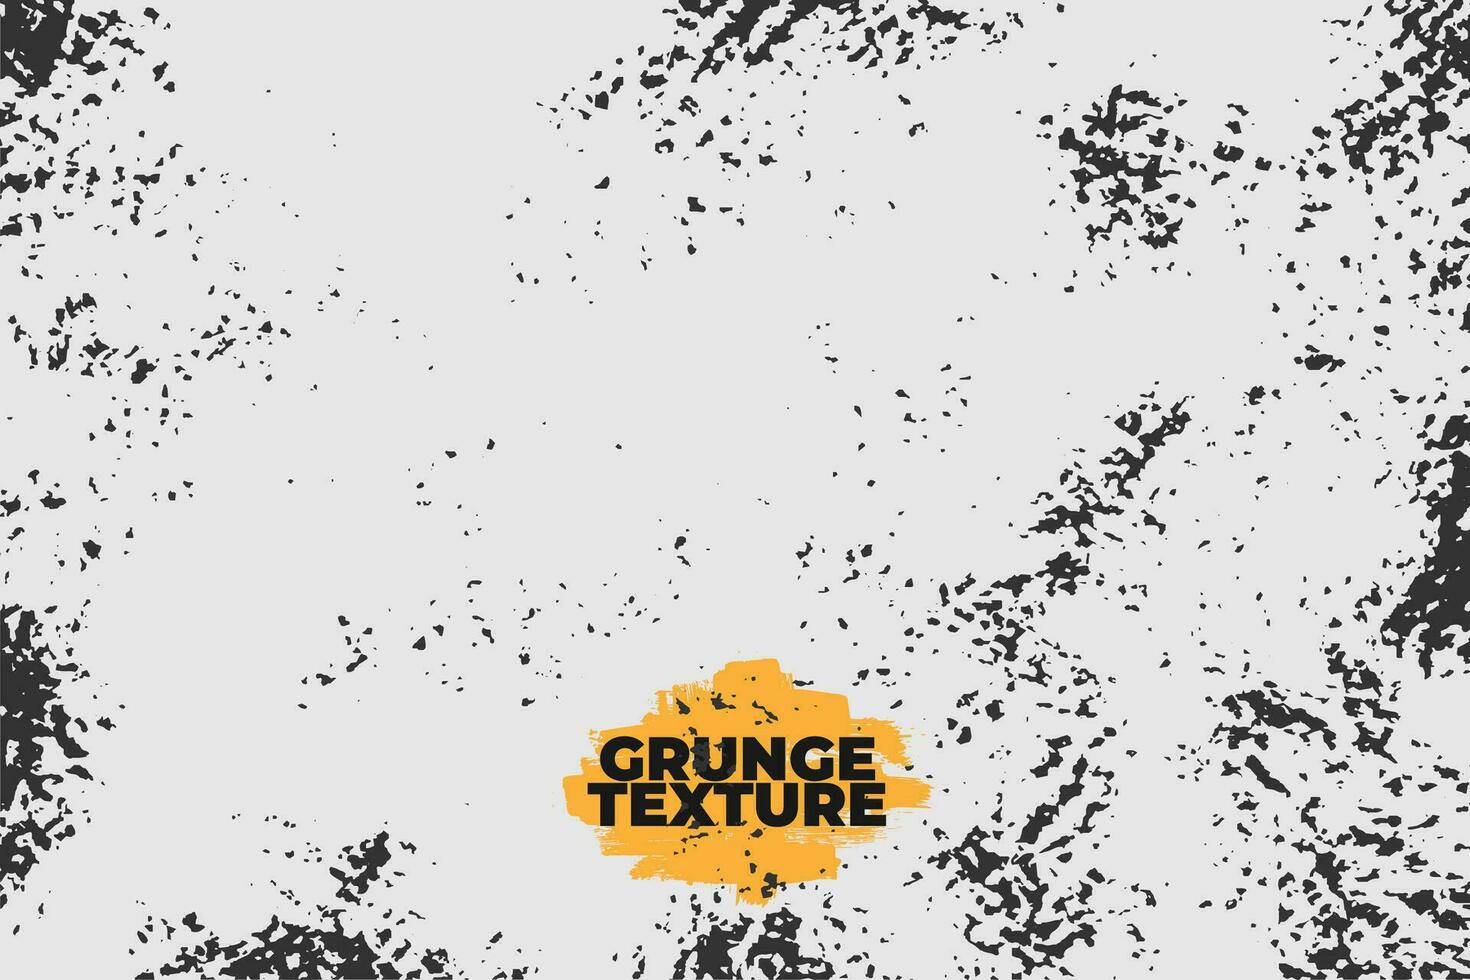 Grunge Texture black and white, dust particle and dust grain, vintage Distressed effect vector